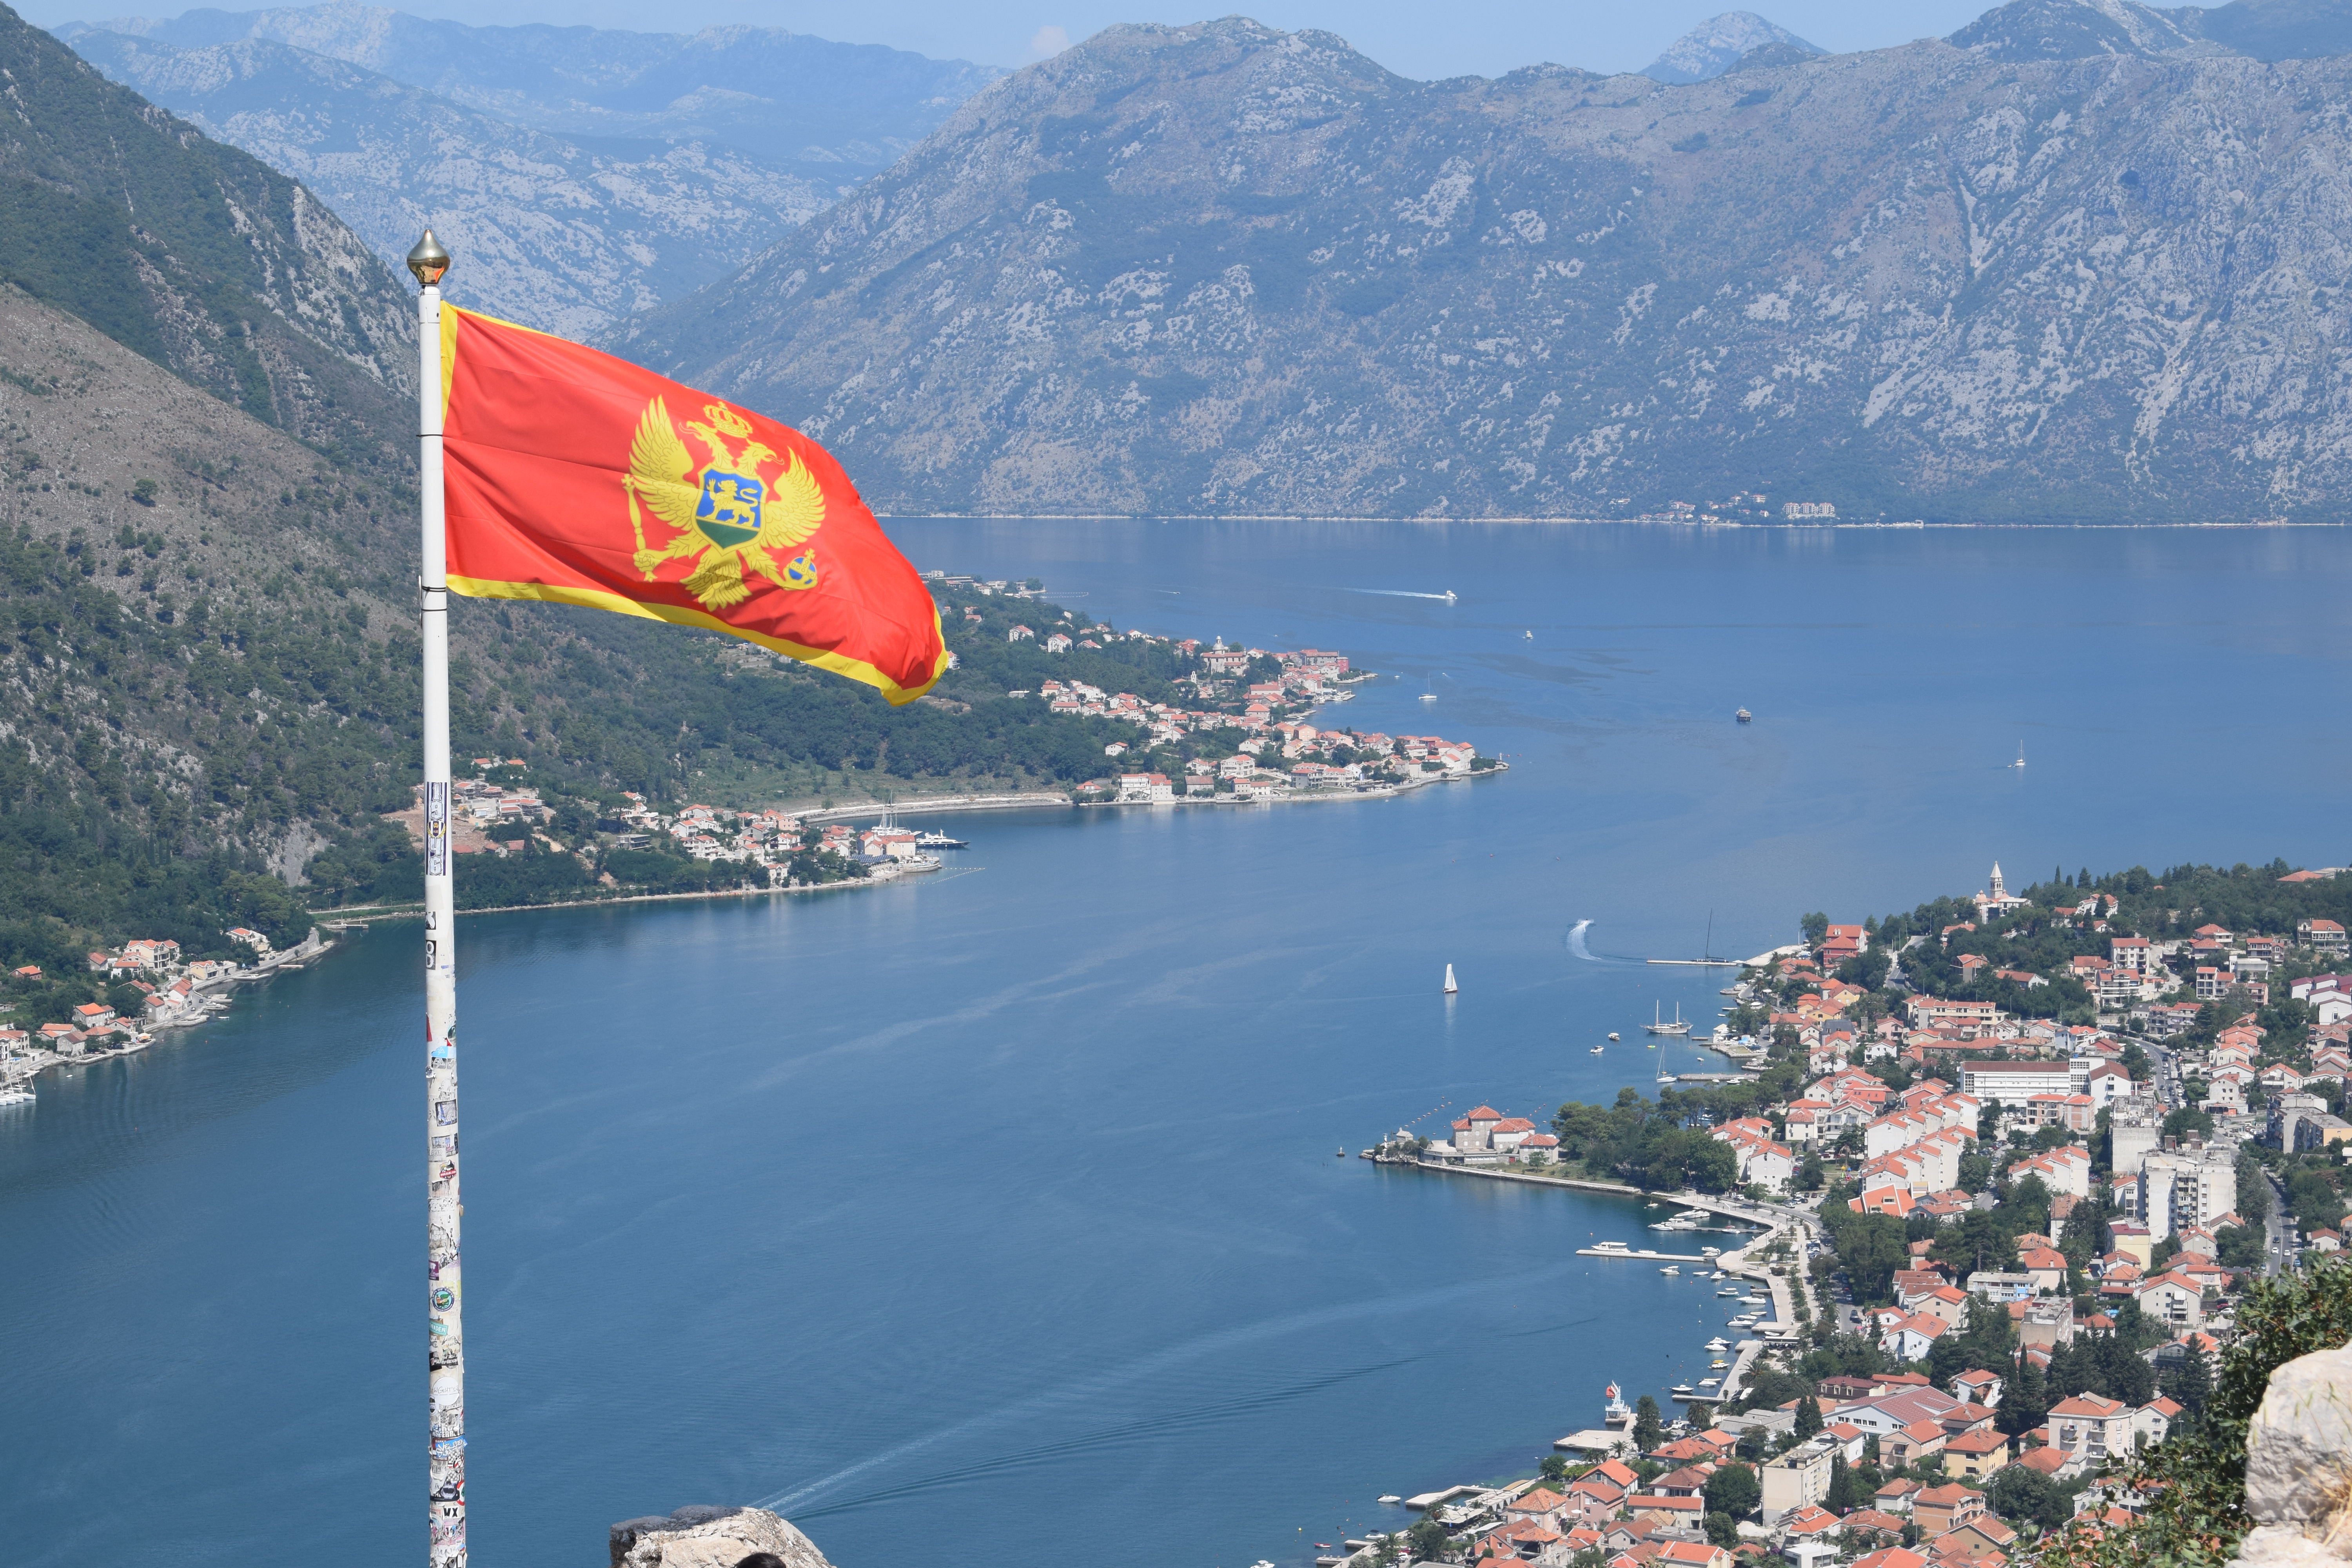 View of Kotor from Castle Of San Giovanni. Photo taken by Geotiger18 on July 13, 2018.